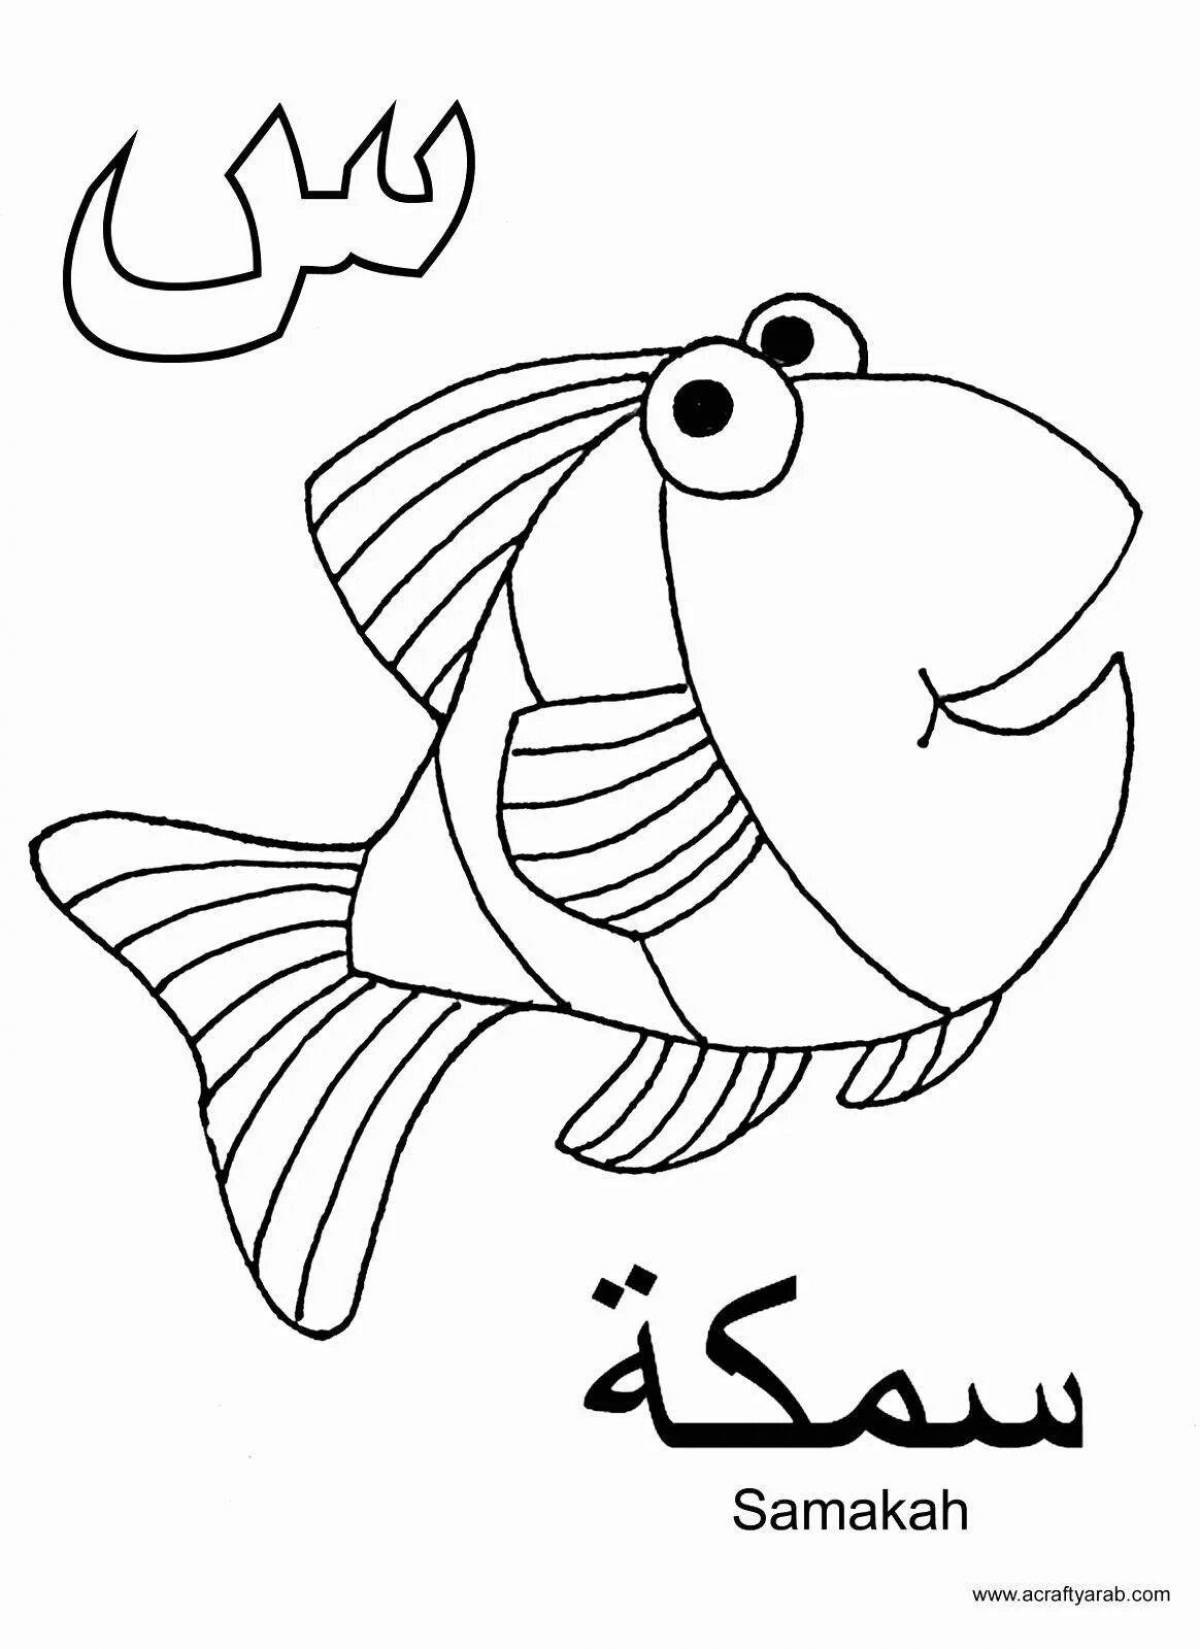 A fun coloring book with Arabic letters